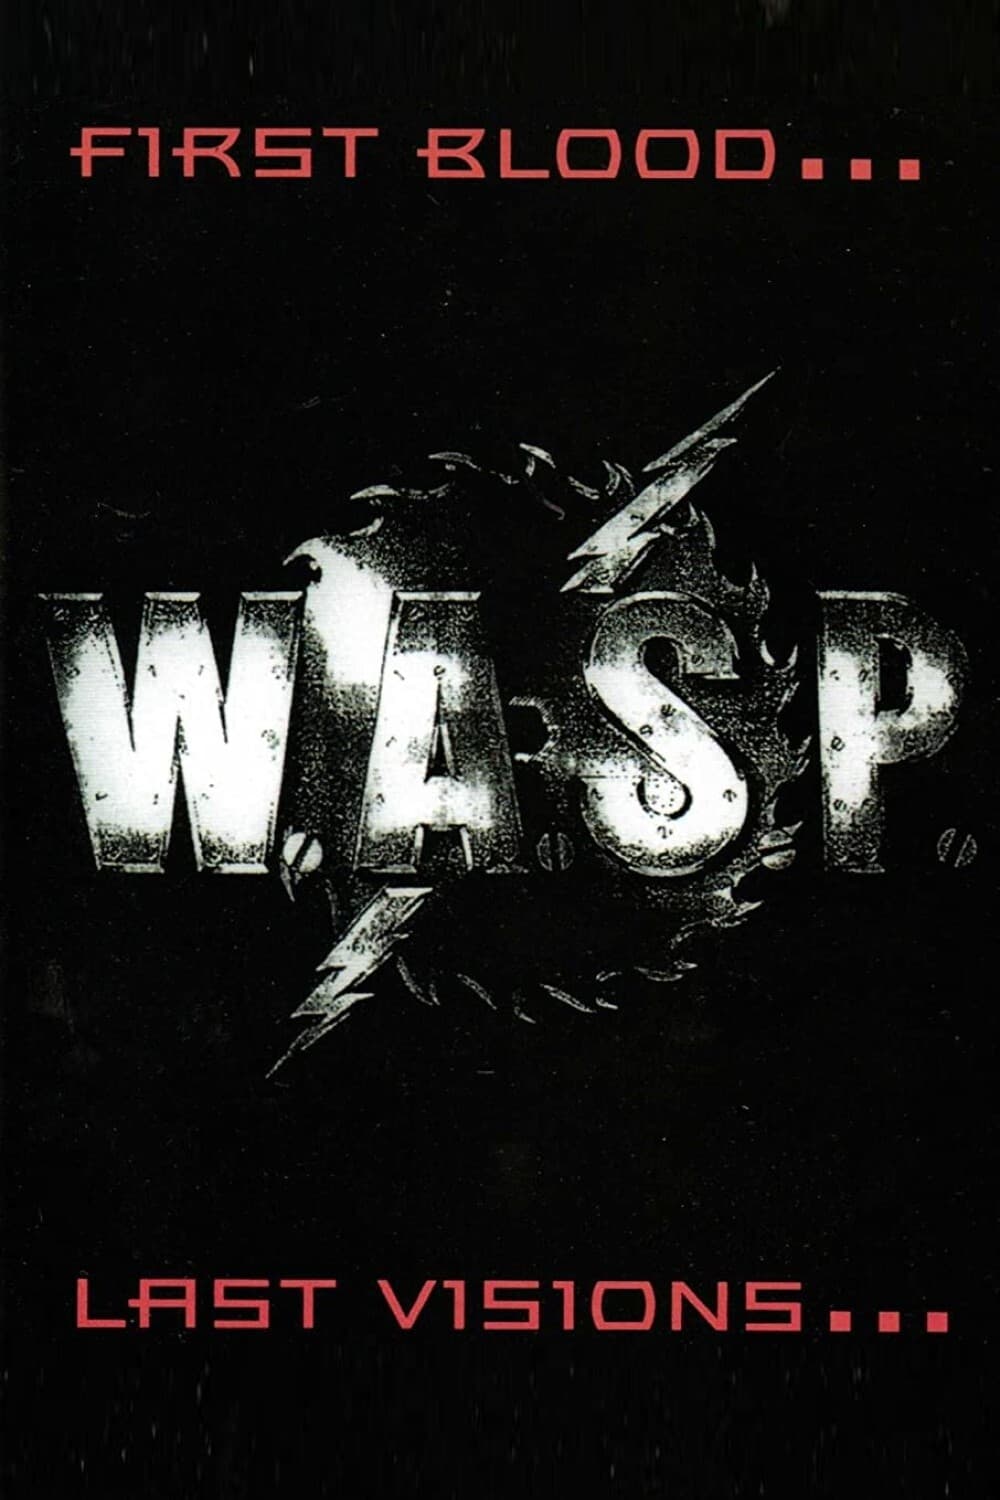 W.A.S.P. | First Blood... Last Visions...